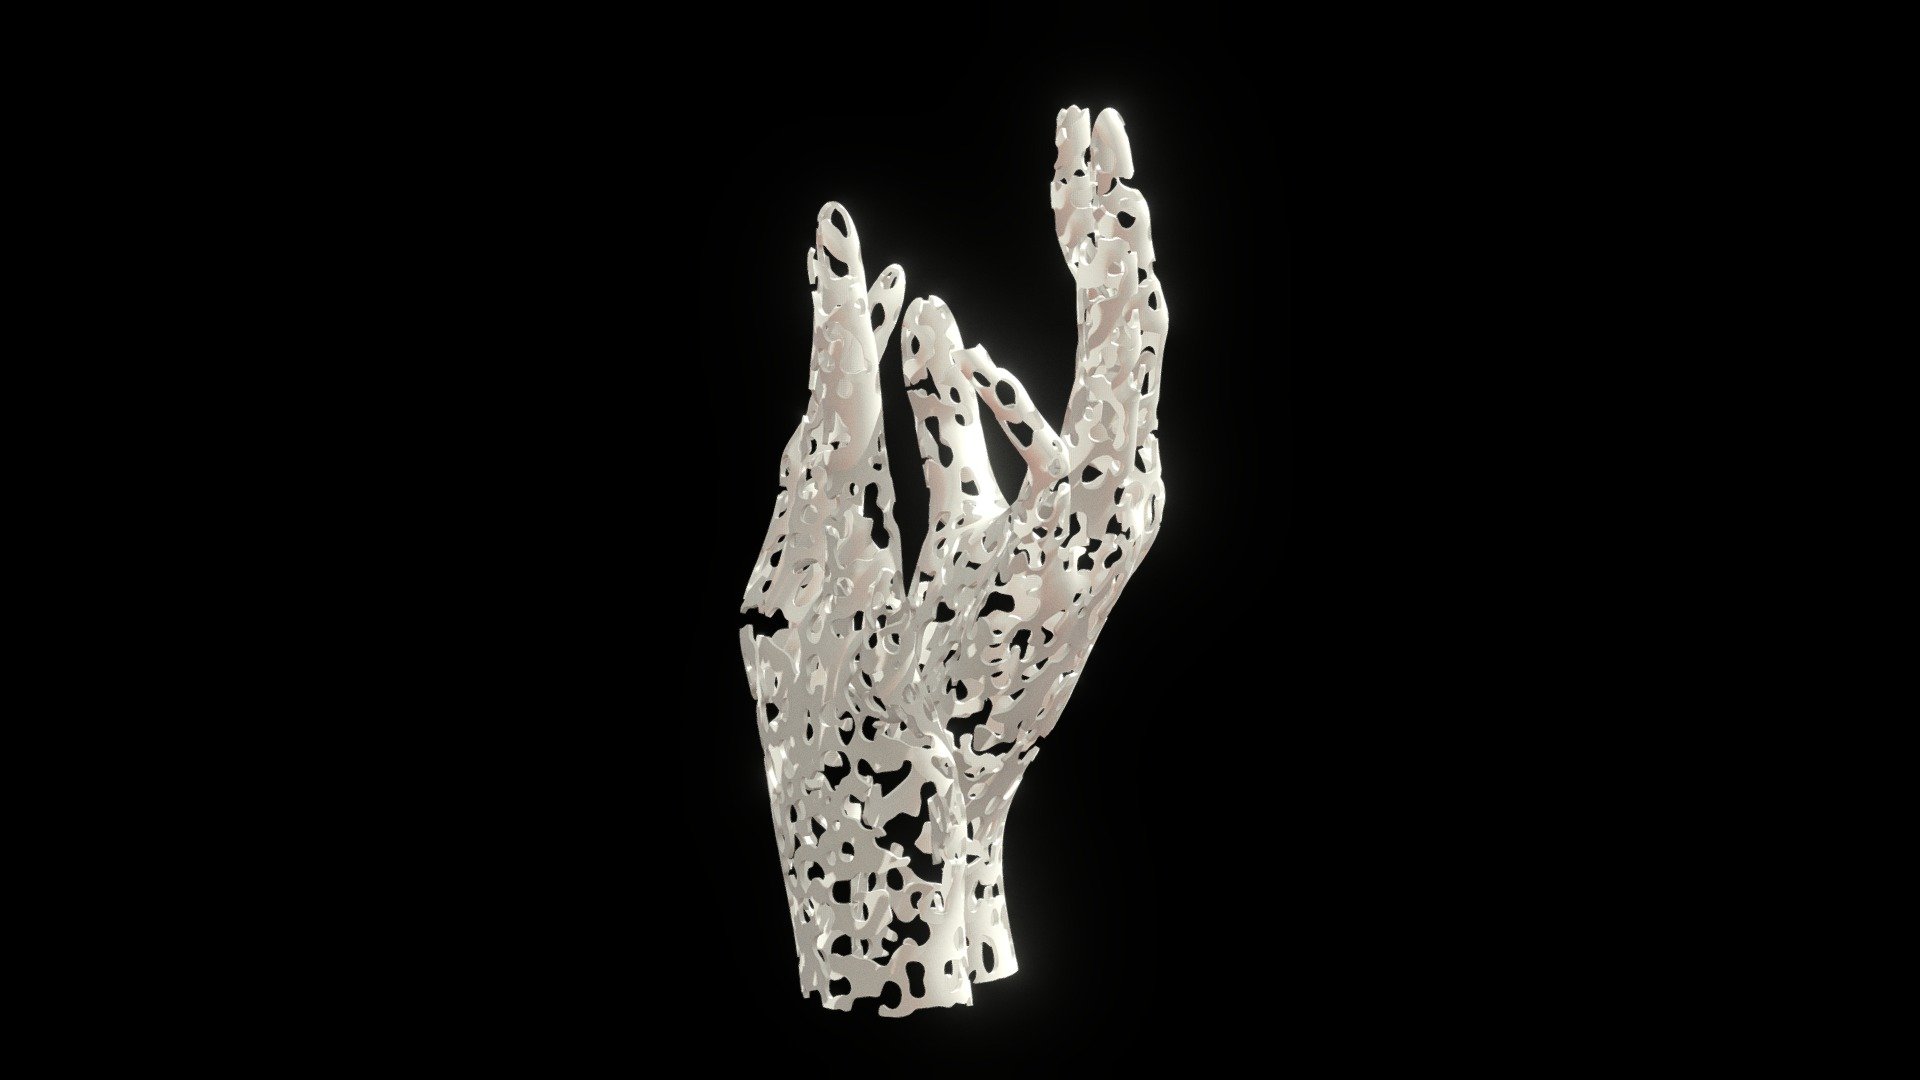 A digitally altered hand sculpture. Can be used as a room decor, as well as to hold spheres, jewelry, phones, notebooks, etc.

Features:


Native .blend file
Wide format support
Life-sized model
Unique shape and topology

P.S. If you use this for 3D printing, I recommend also printing a base for extra stability.
Posed in Blender, sculpted in ZBrush 3d model